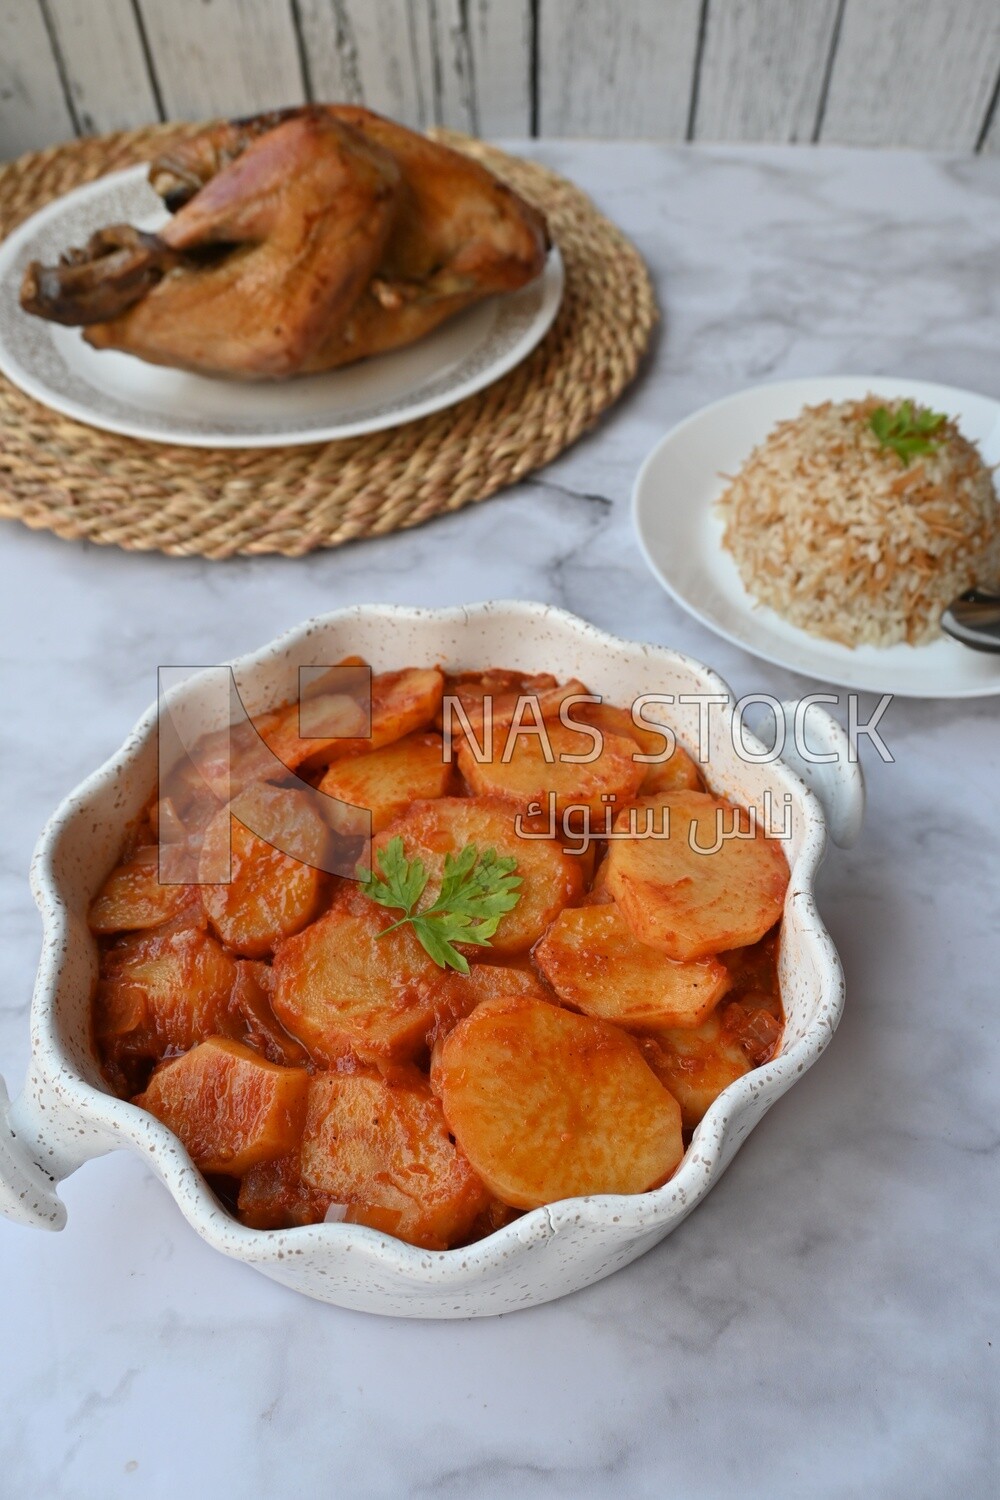 Potato tray sits beside a plate of rice and chicken